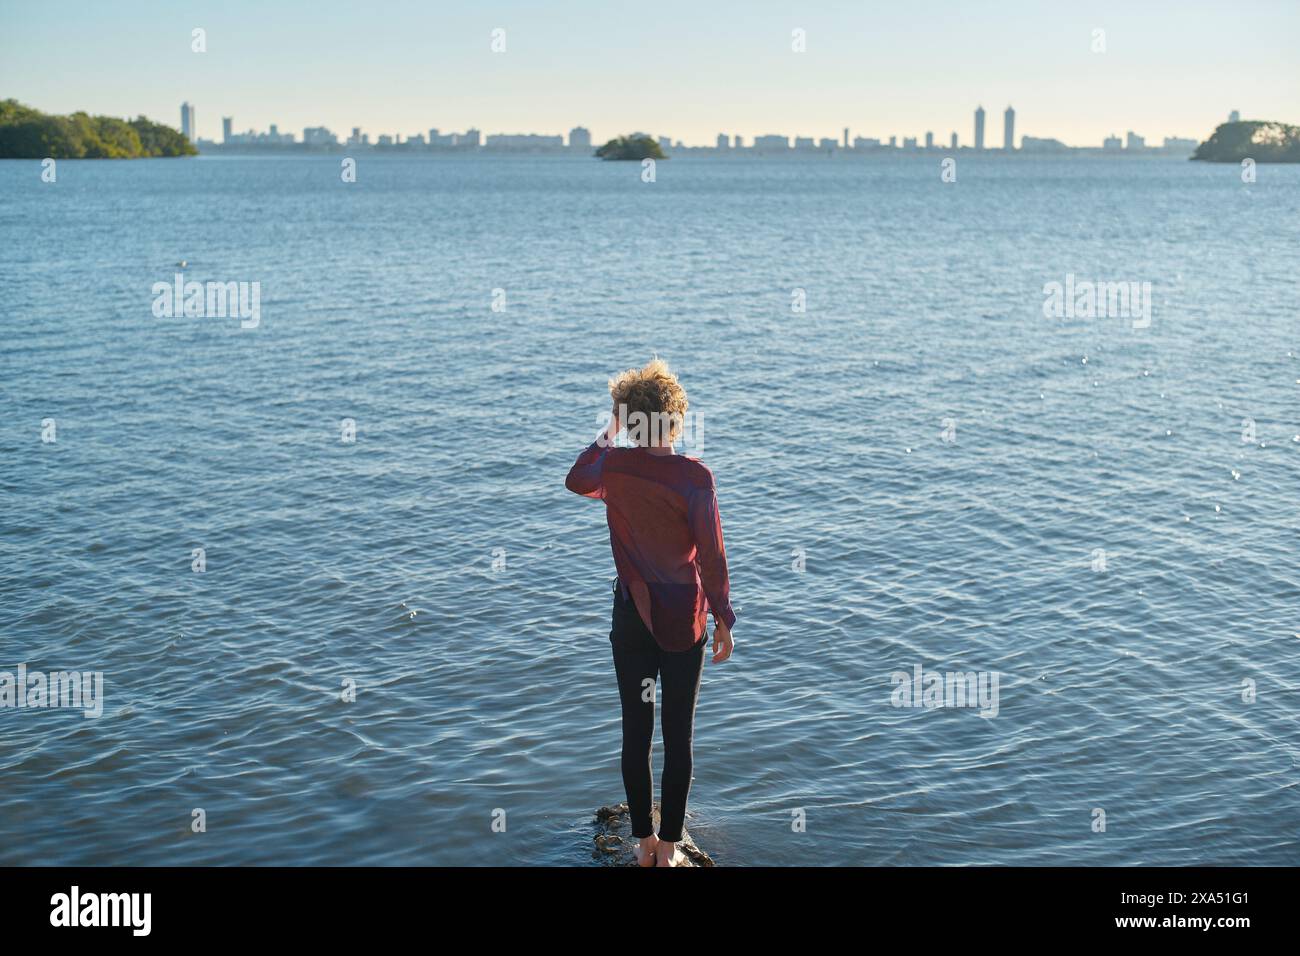 A person stands at the edge of a serene body of water, looking towards a distant city skyline under a clear blue sky. Stock Photo